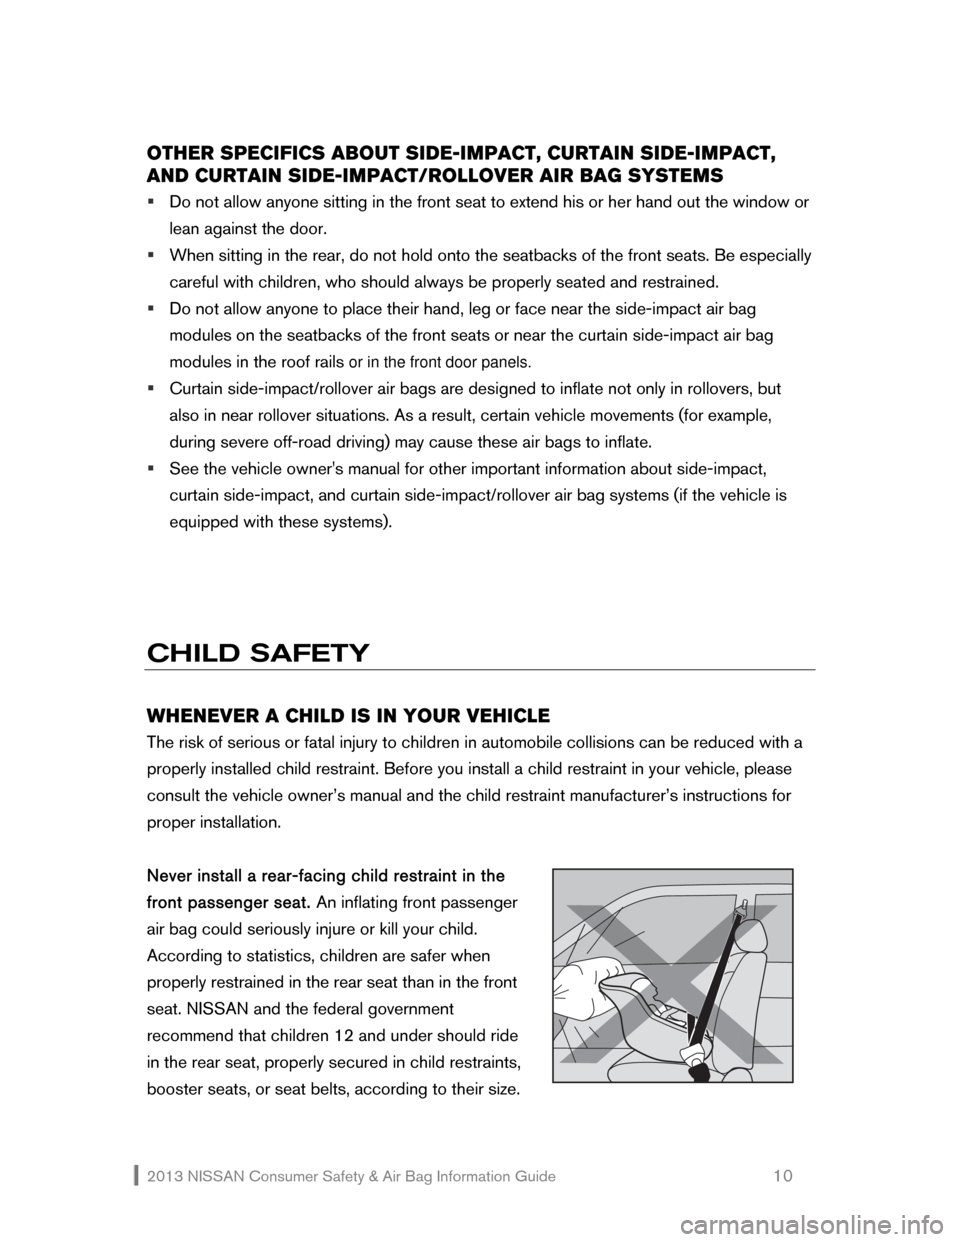 NISSAN ARMADA 2013 1.G Consumer Safety Air Bag Information Guide 2013 NISSAN Consumer Safety & Air Bag Information Guide                                                   10 
OTHER SPECIFICS ABOUT SIDE-IMPACT, CURTAIN SIDE-IMPACT, 
AND CURTAIN SIDE-IMPACT/ROLLOVER 